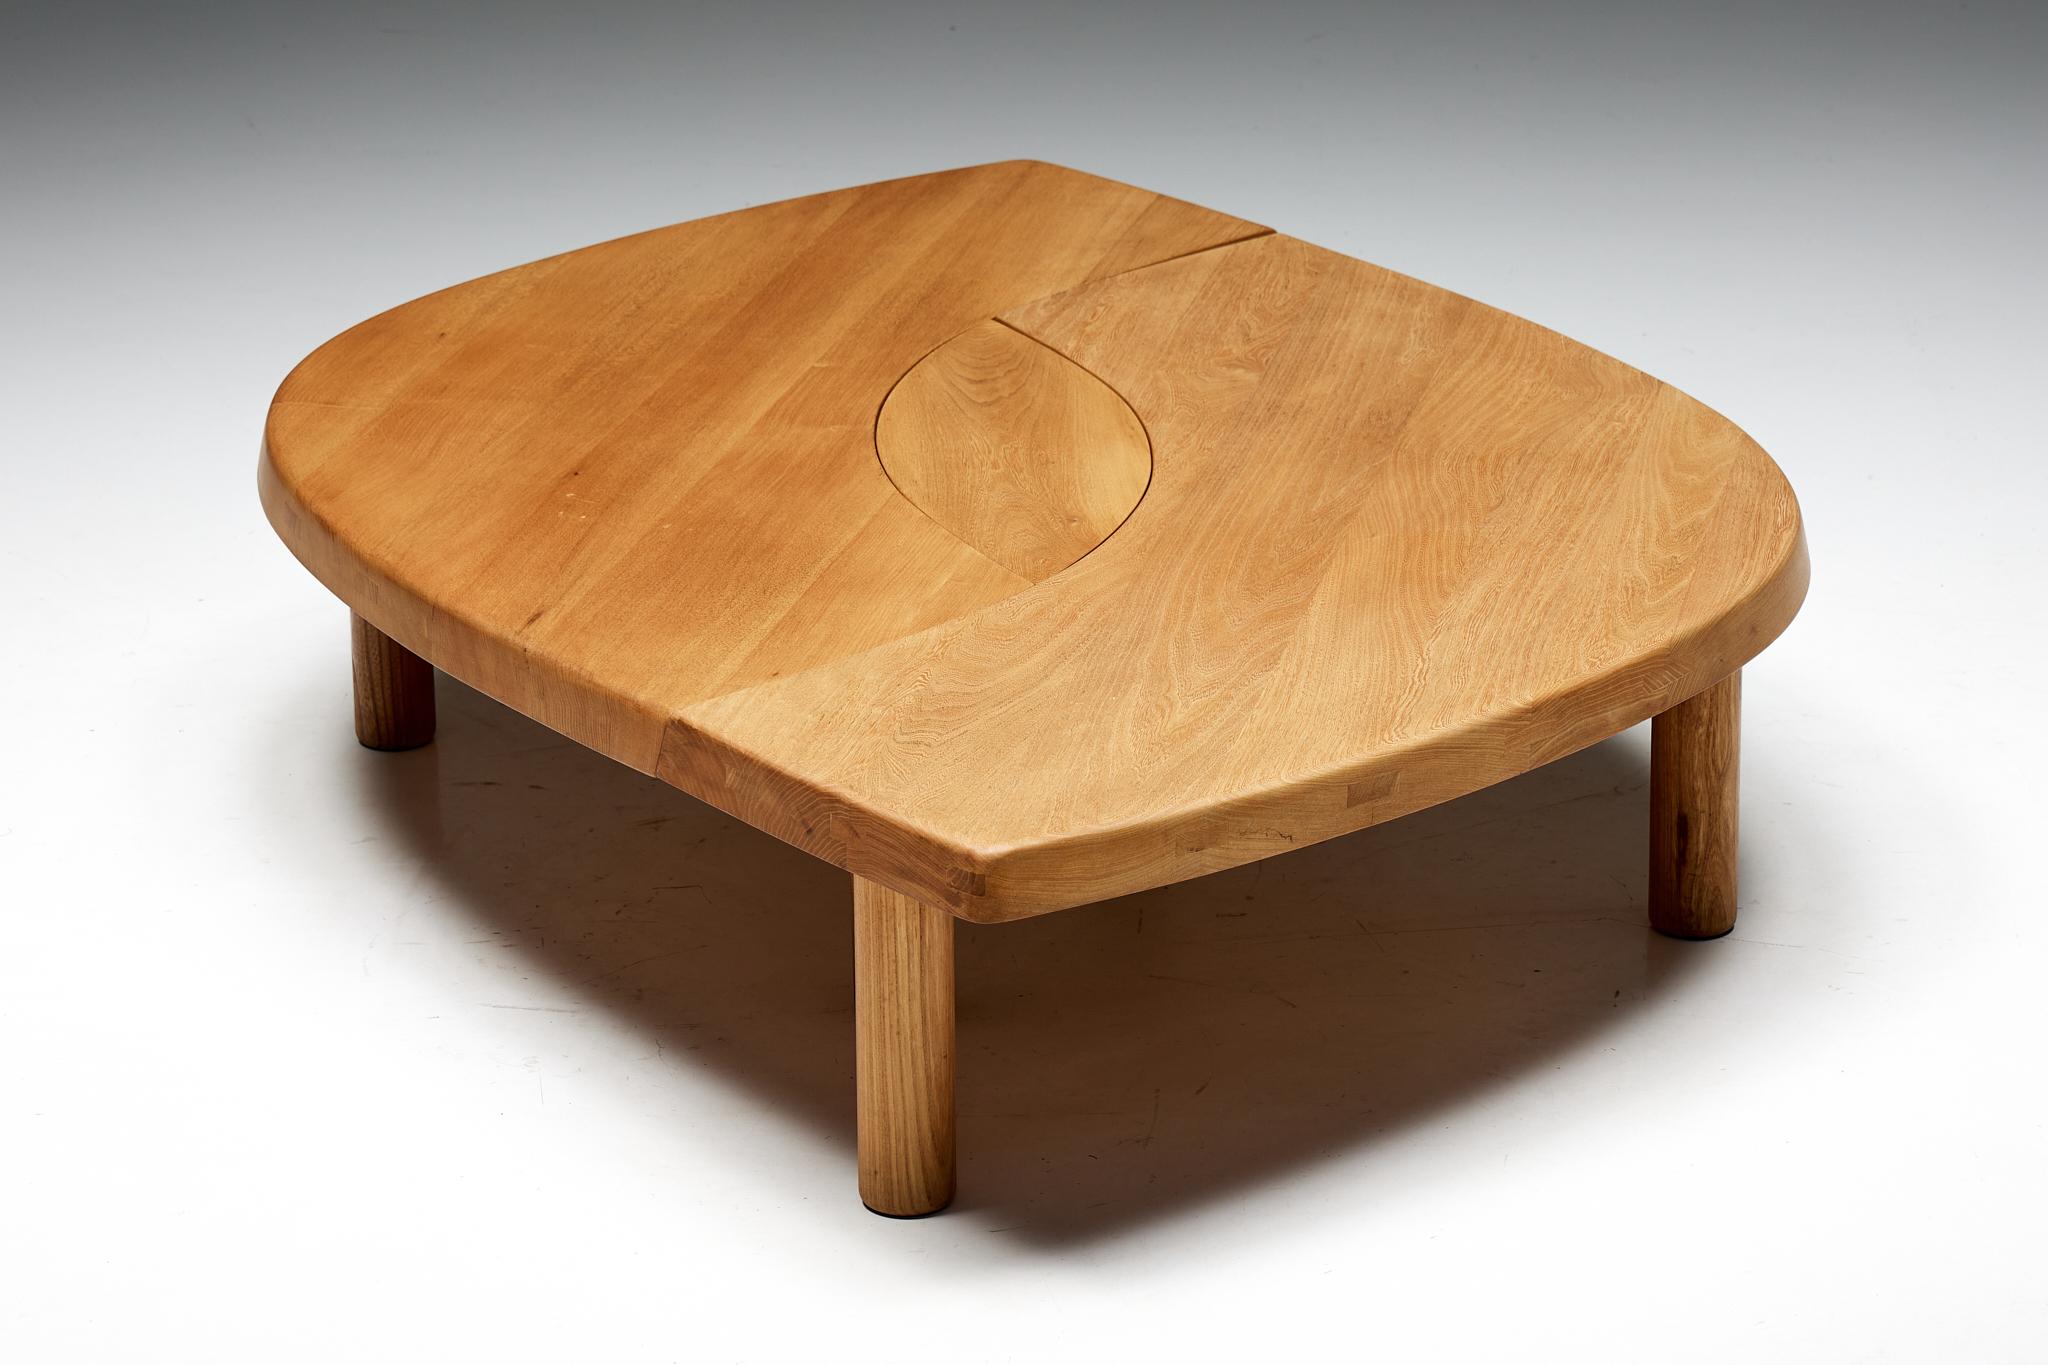 Pierre Chapo; Solid Elm; Coffee Table; L'oeil; Charlotte Perriand; Paris; Le Corbusier; Mid-Century Modern; 1970s; Wood Joint;

Eye-shaped 'T22' coffee table in solid elm by Pierre Chapo, a stunning composition consisting of two arch-shaped tables